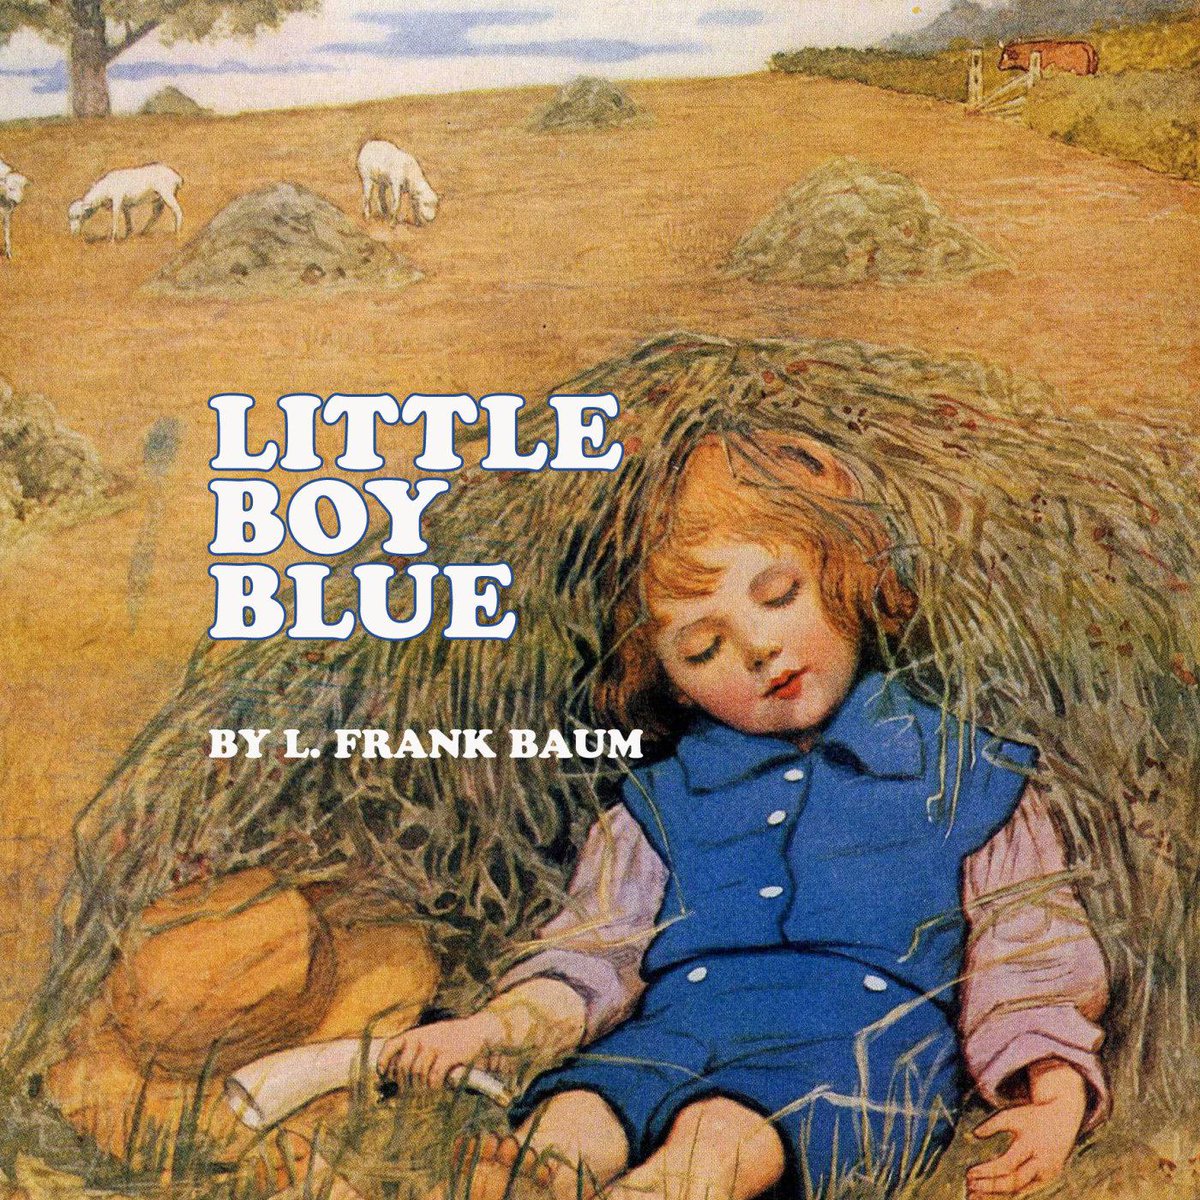 Book #29 - Little Boy Blue by L. Frank BaumBook #30 - The Tale of Peter Rabbit by Beatrix PotterBook #31 - The Story of Doctor Dolittle by Hugh LoftingWhen I told you I'm a sucker for children's books and nursery stories I mean it. I read everything I can get my hands on.